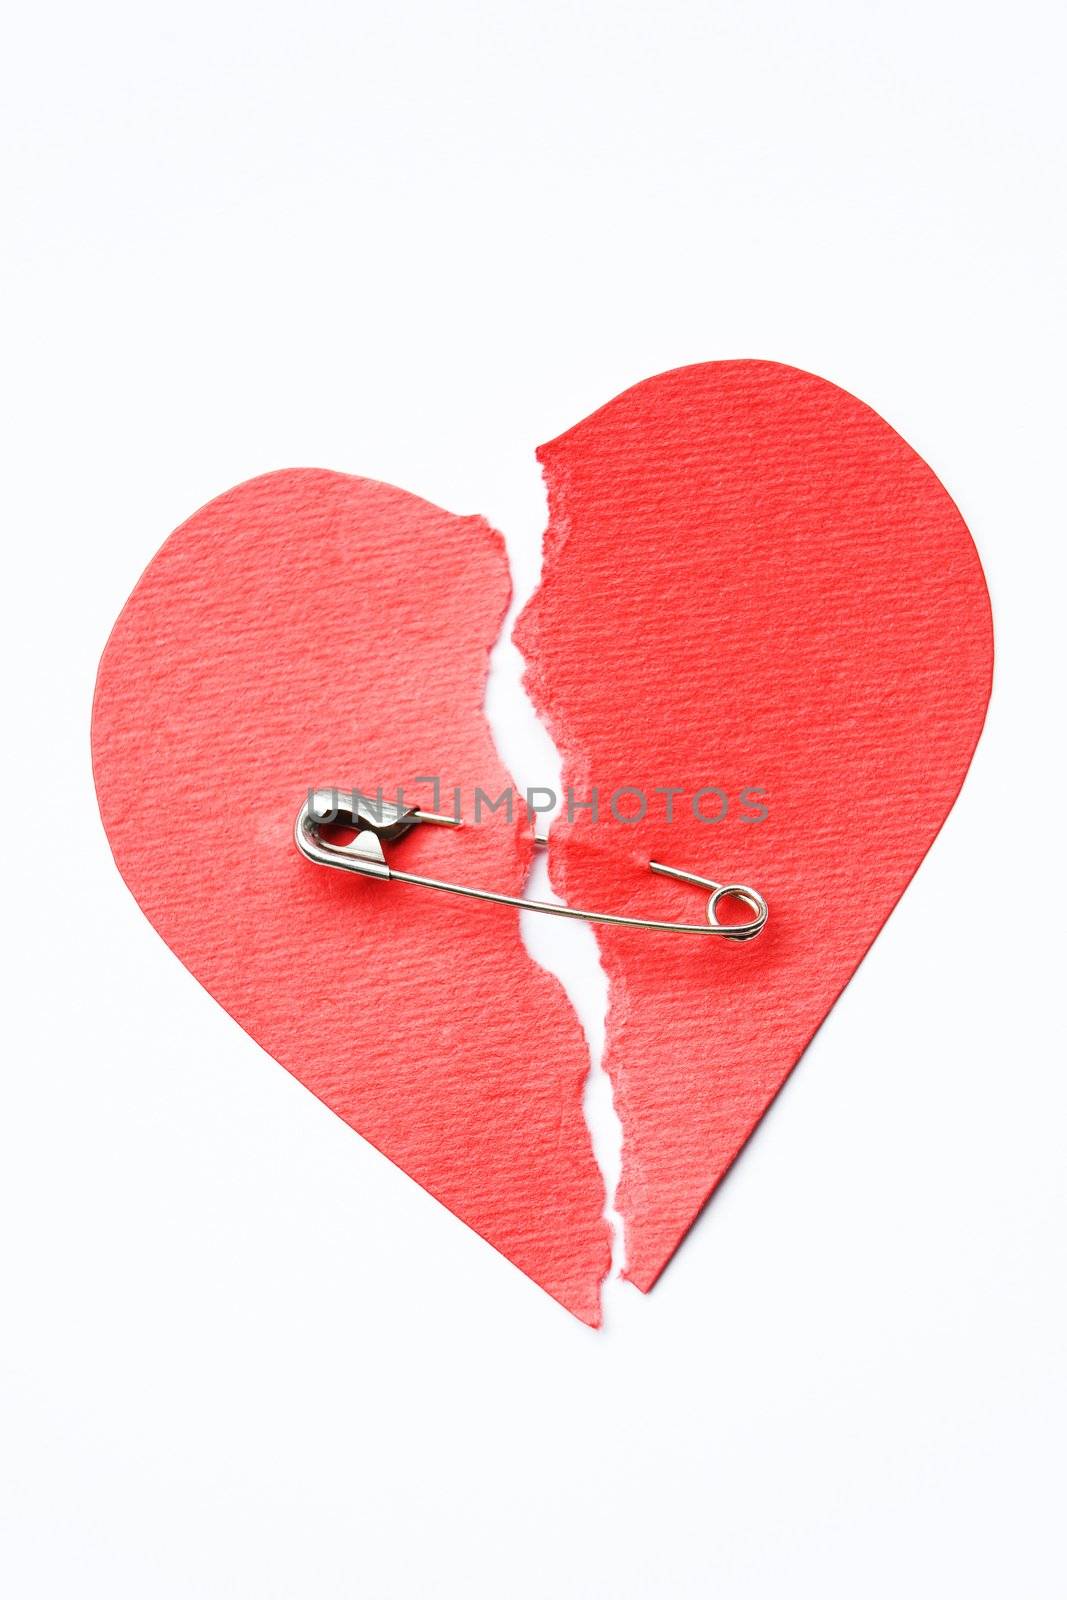 Broken heart joined with safety pin by daisydaisy